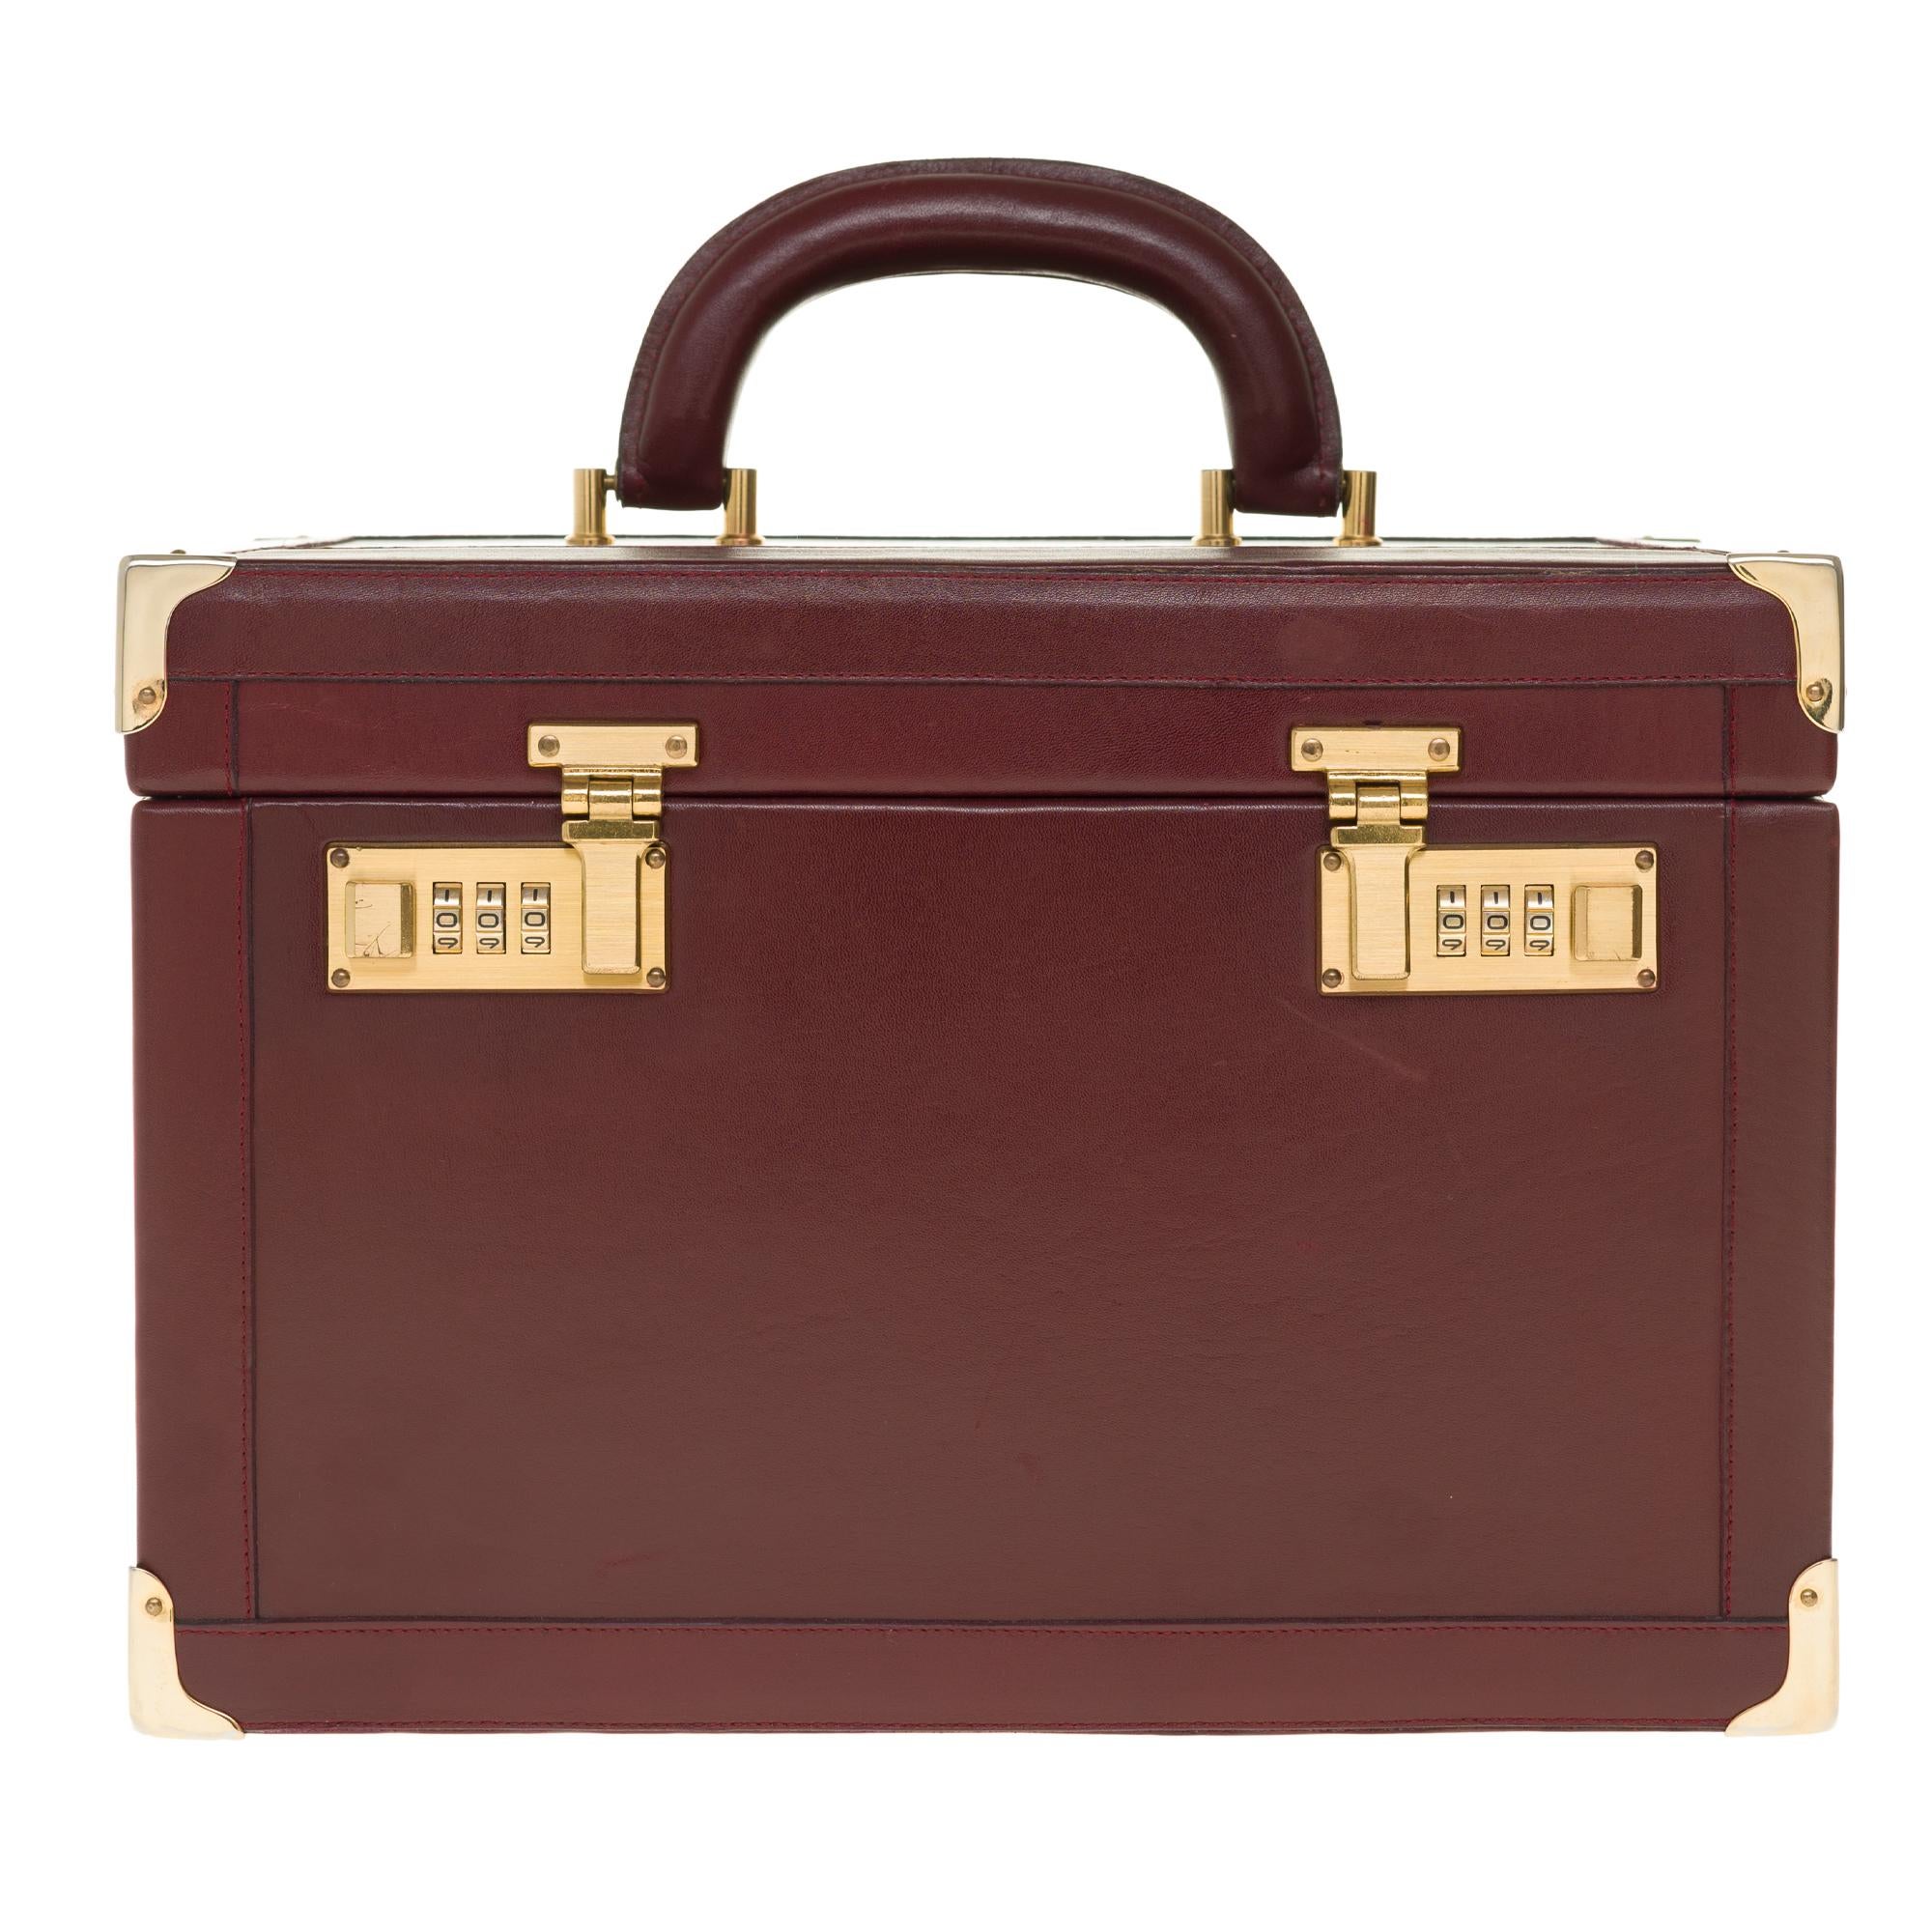 Beautiful Vintage Vanity Case Cartier in burgundy leather and brass